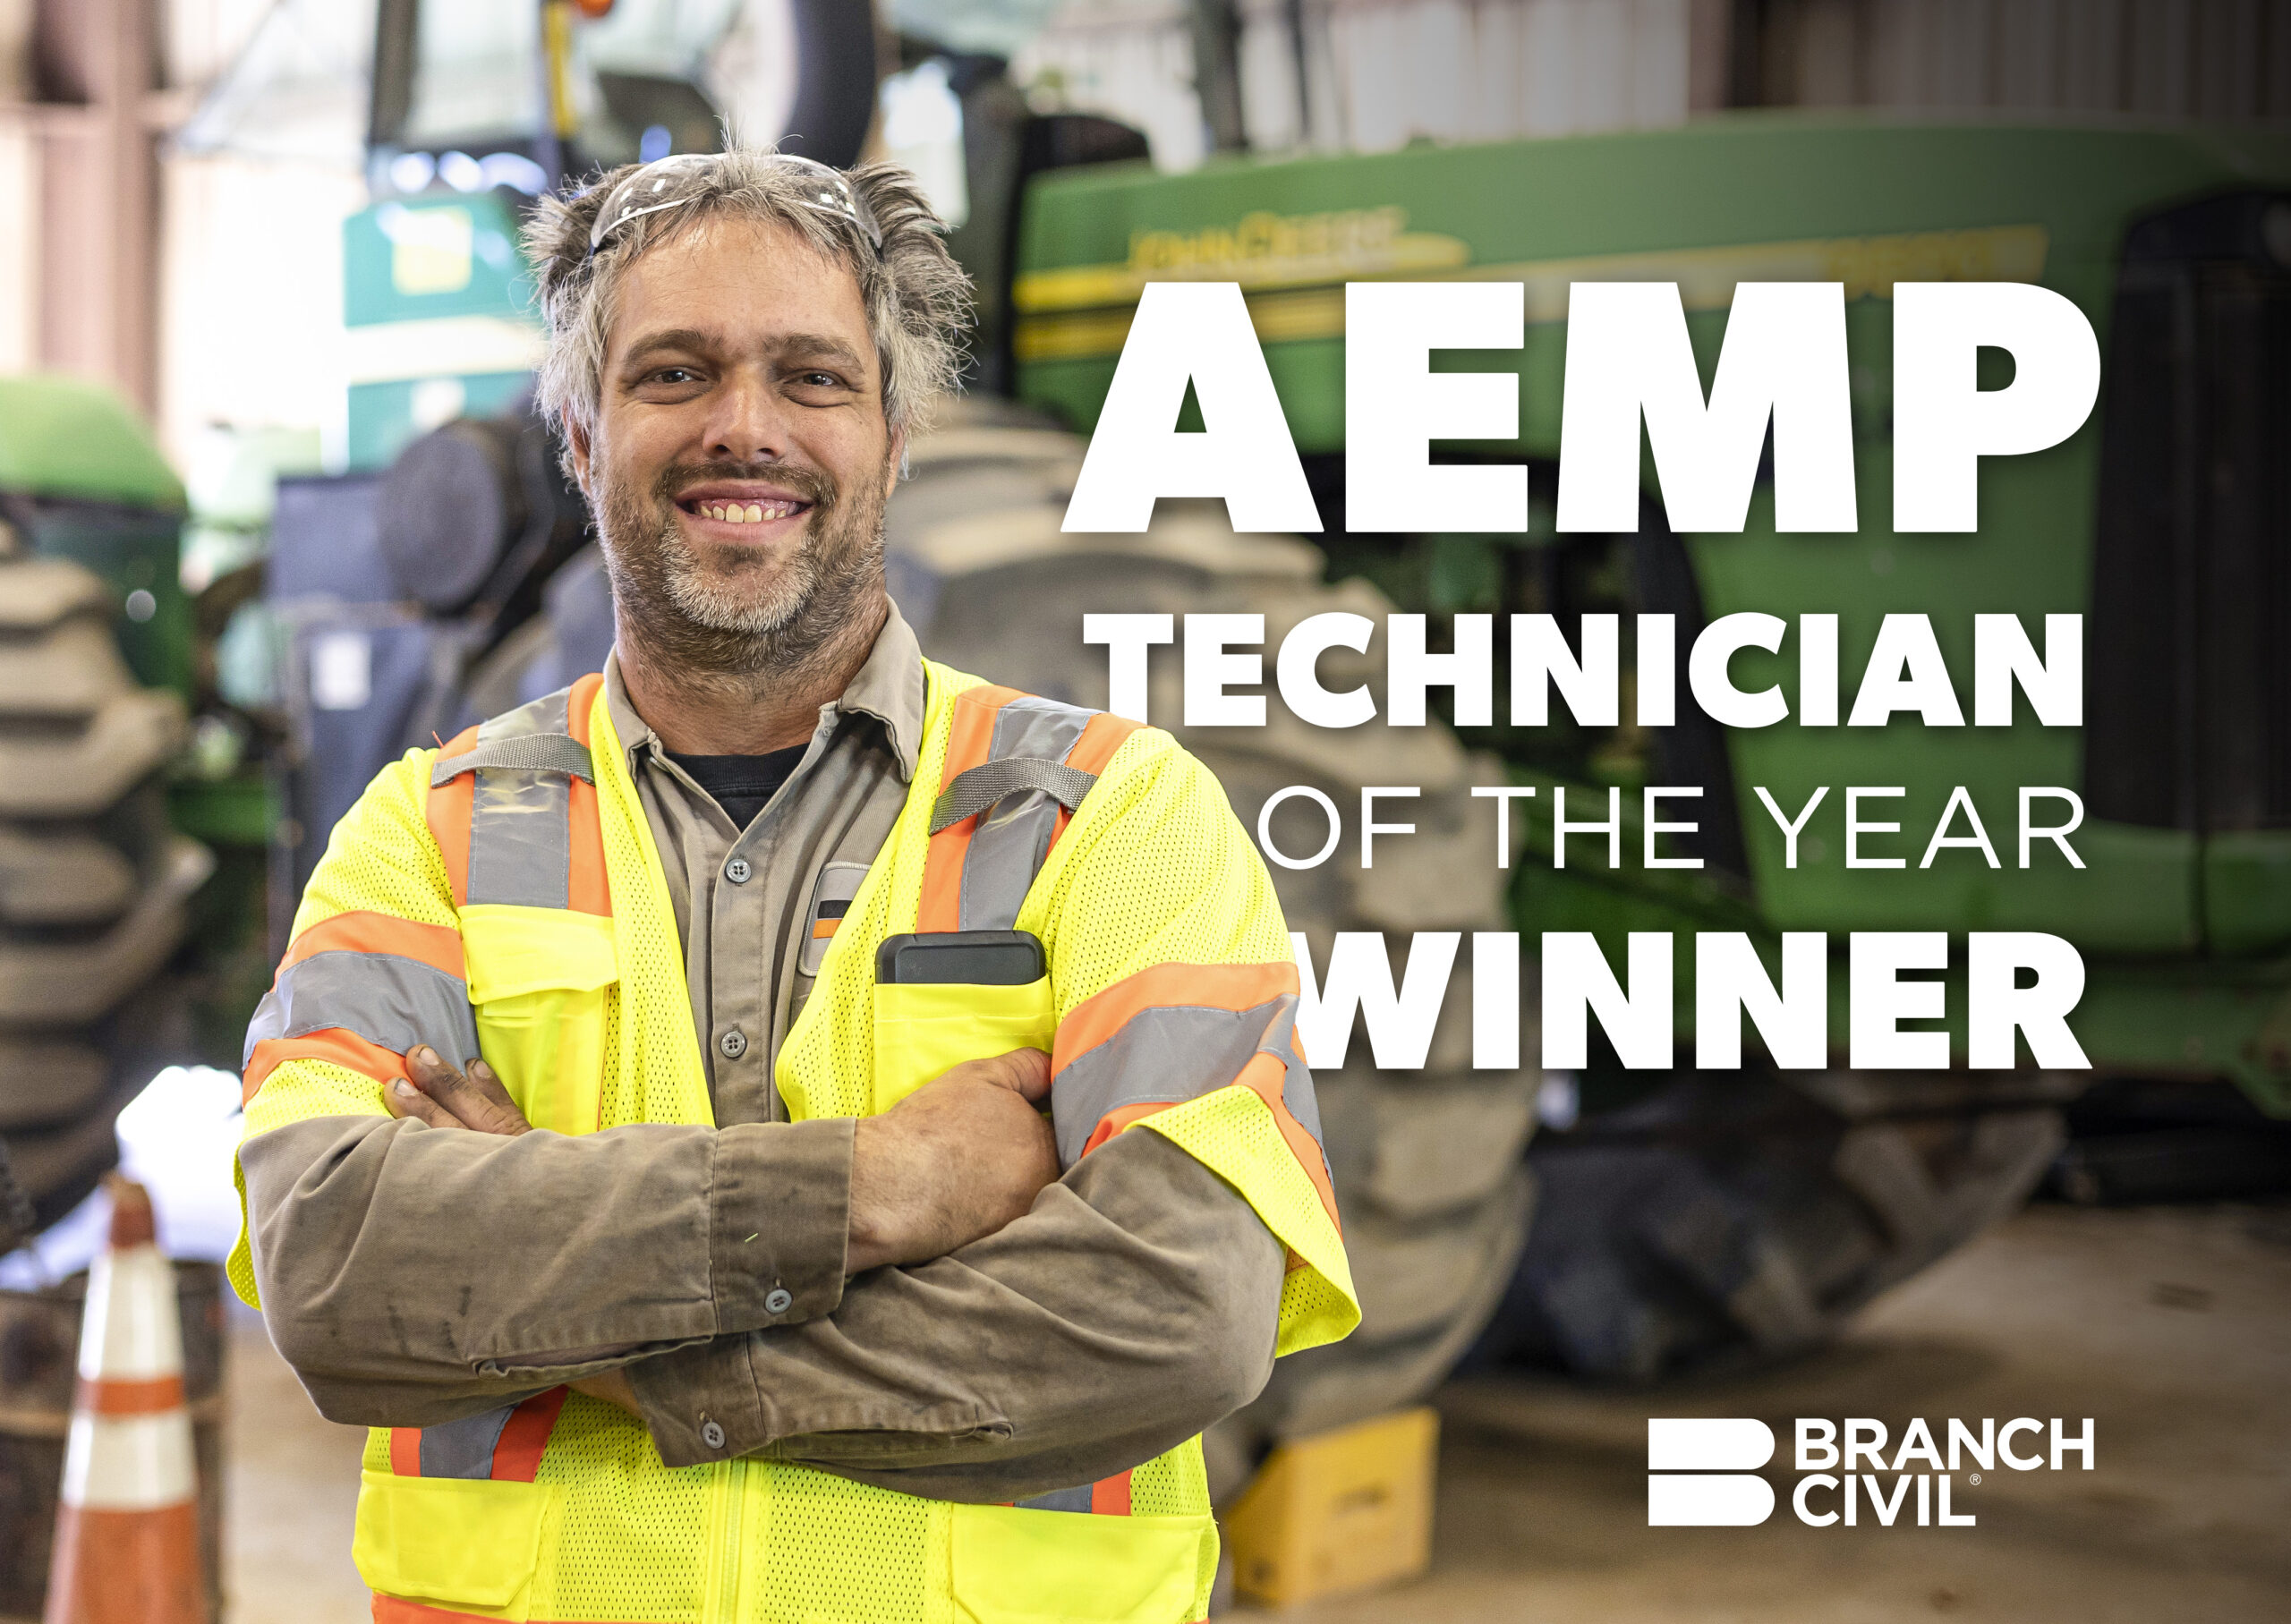 AEMP technician of the year winner graphic with smiling construction worker